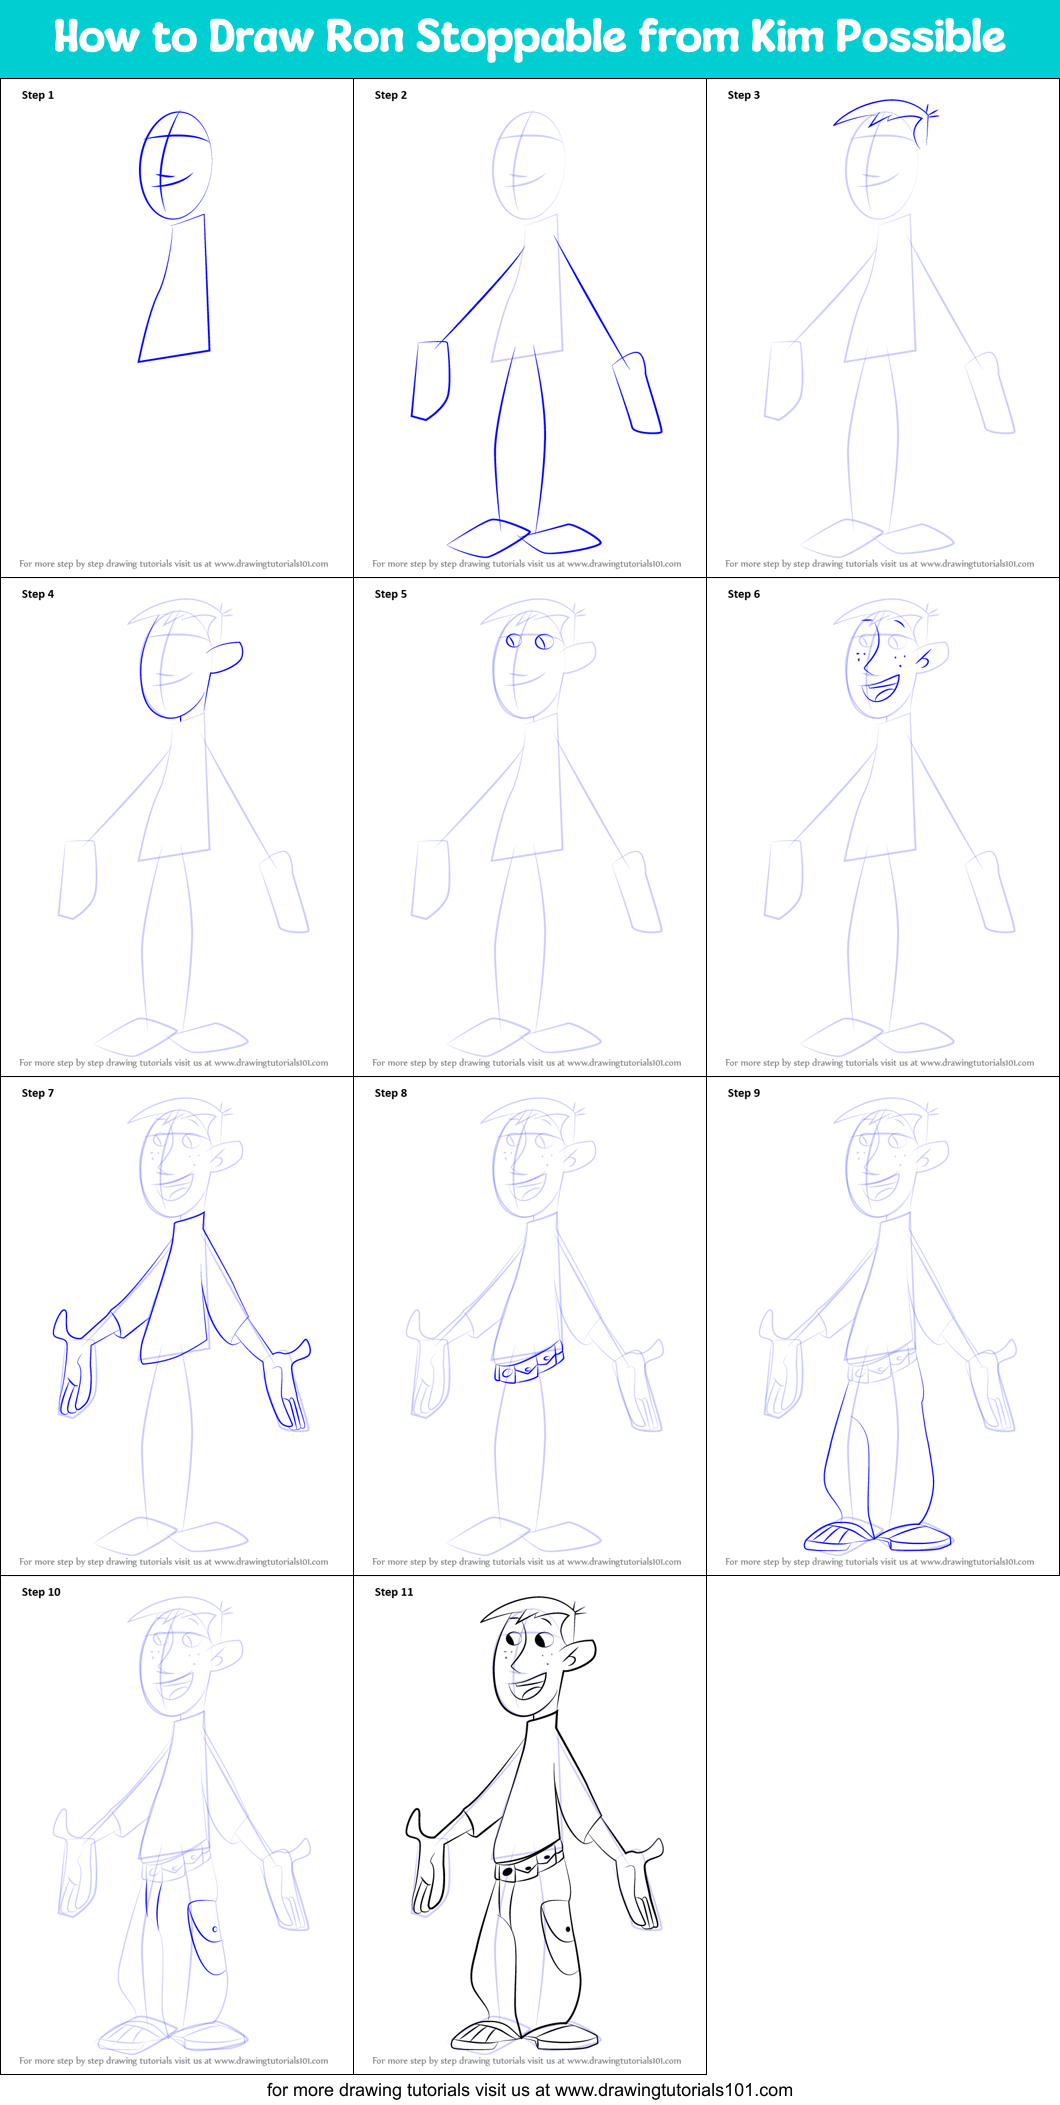 How to Draw Ron Stoppable from Kim Possible printable step by step